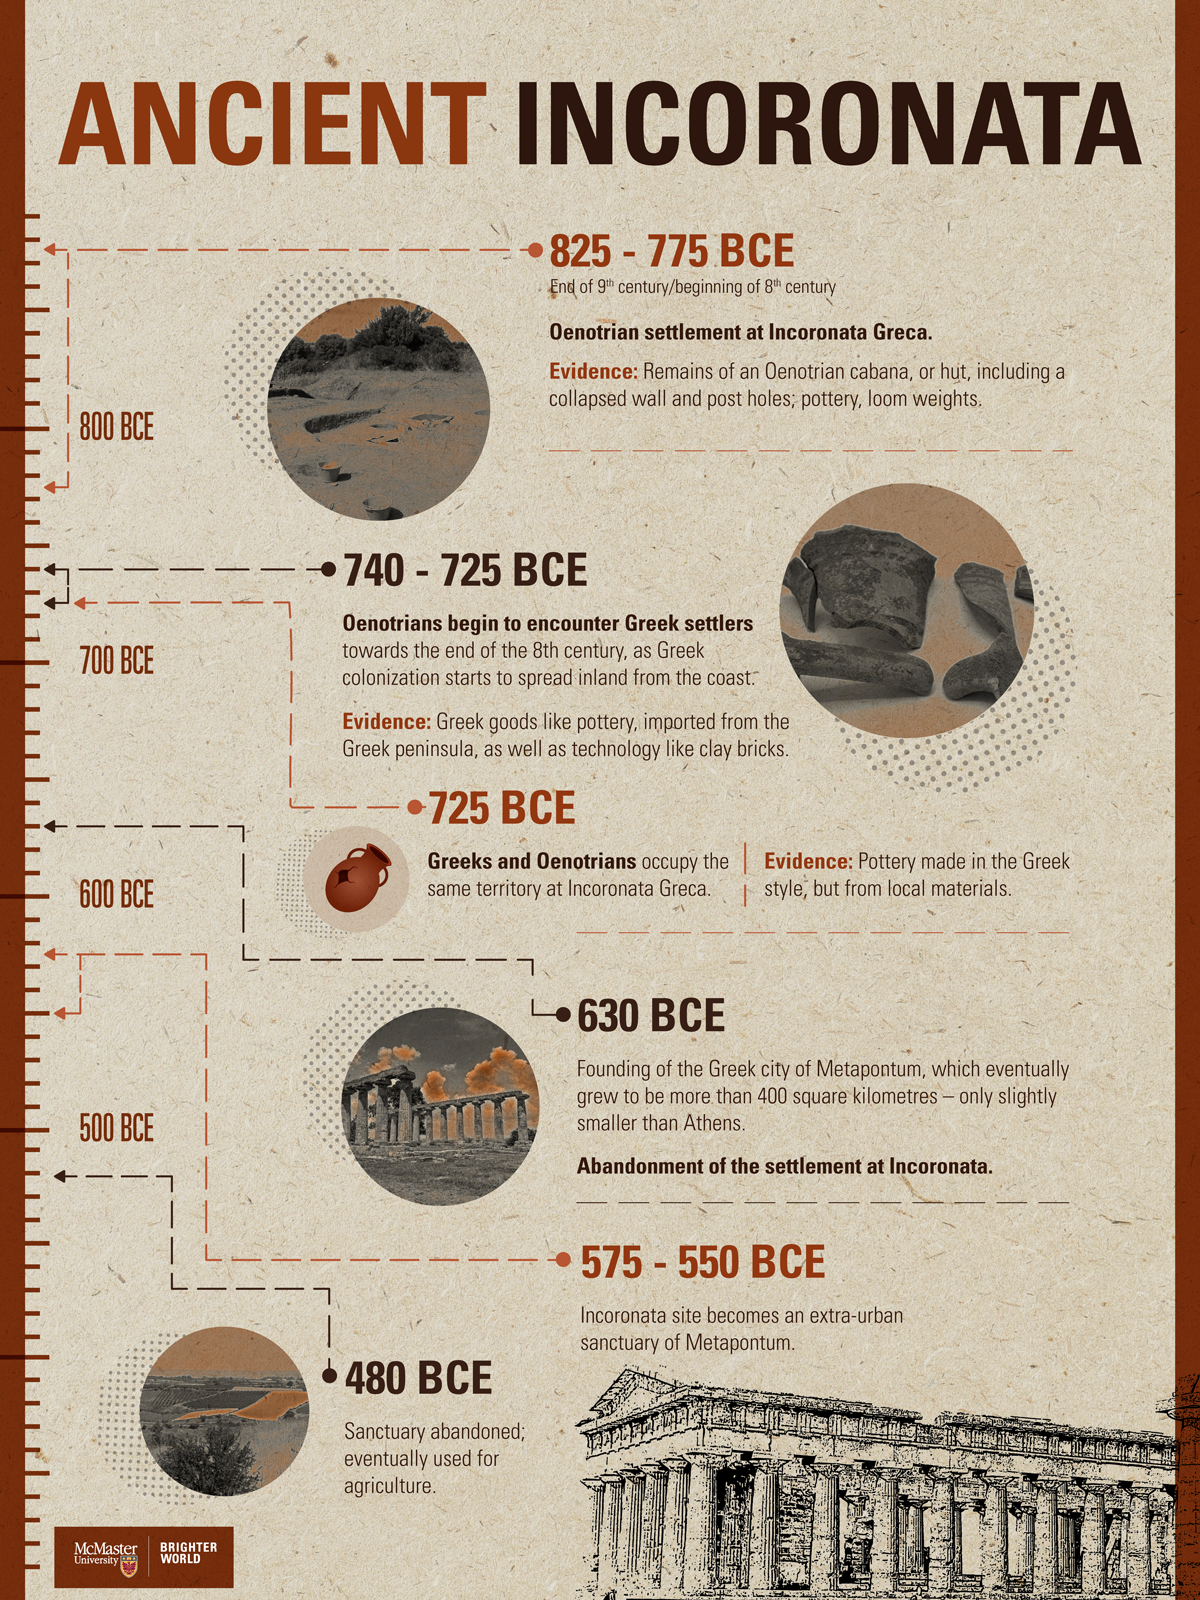 A timeline that highlights the most important parts of Ancient Incoronata, dating from 825 BCE until 480 BCE.